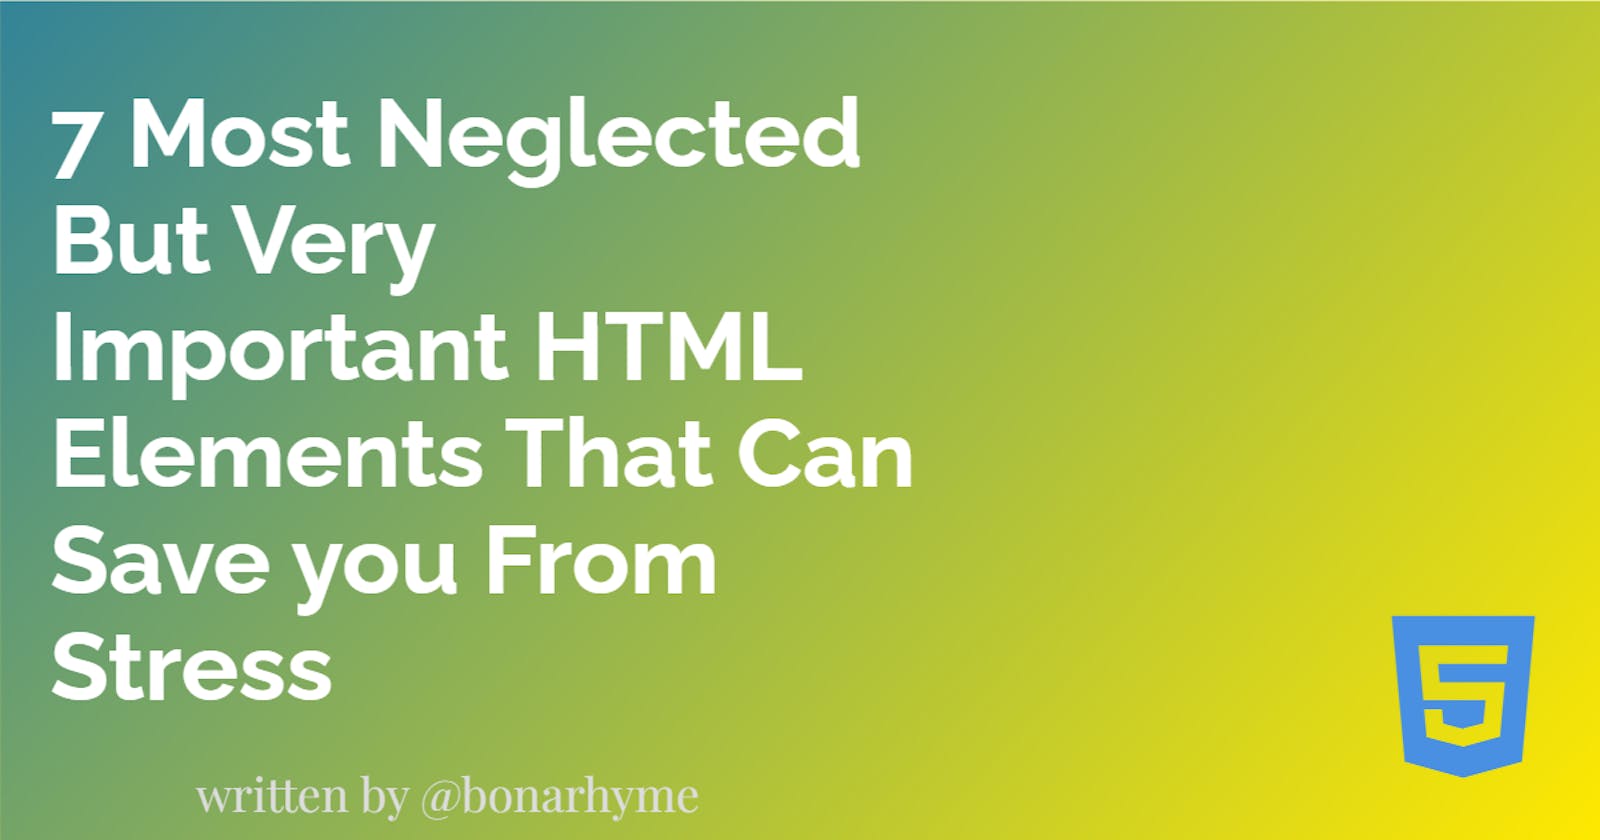 7 Most Neglected But Very Important HTML Elements That Can Save you From Stress